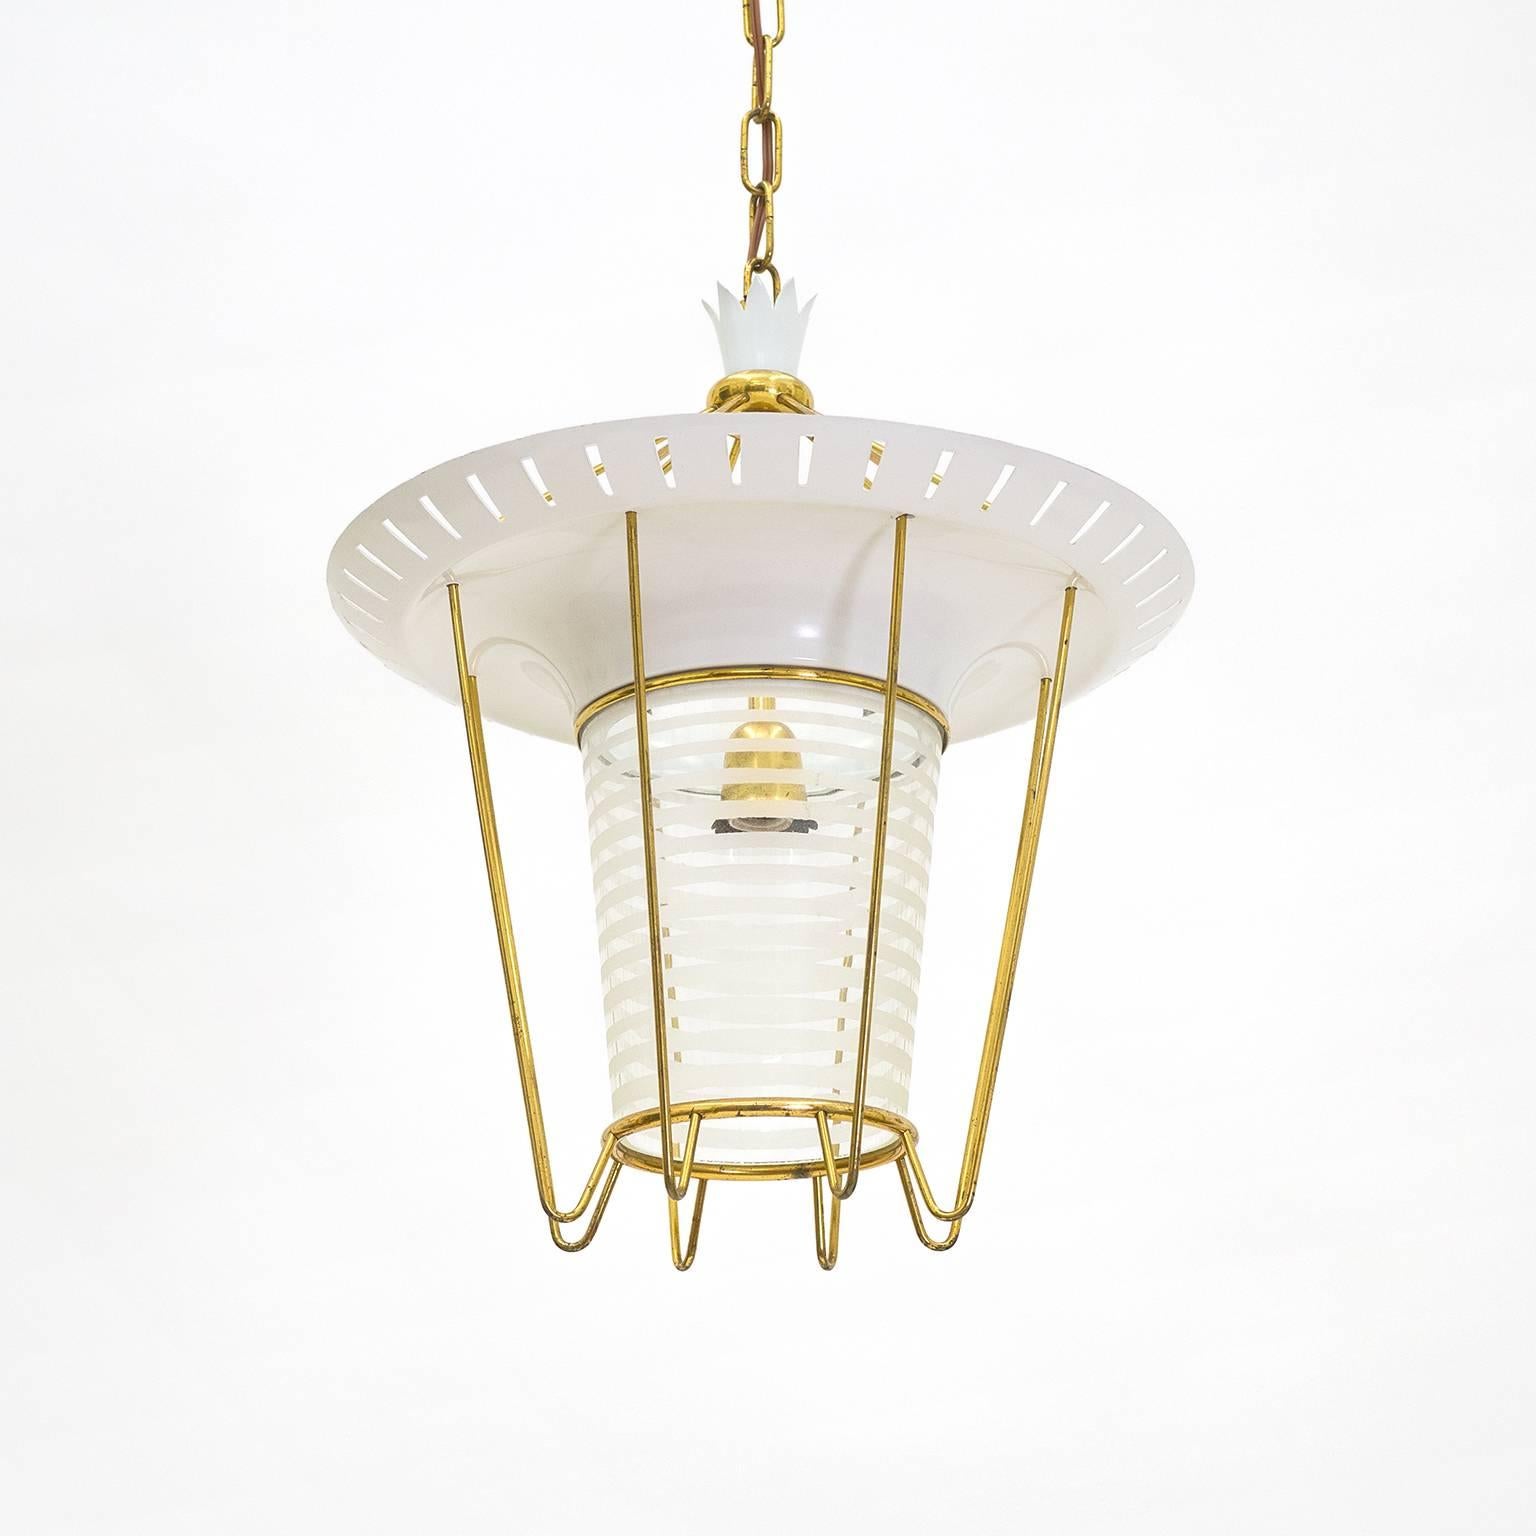 Mid-Century Modern Italian 1950s Lantern in Brass, Glass and Lacquered Aluminum